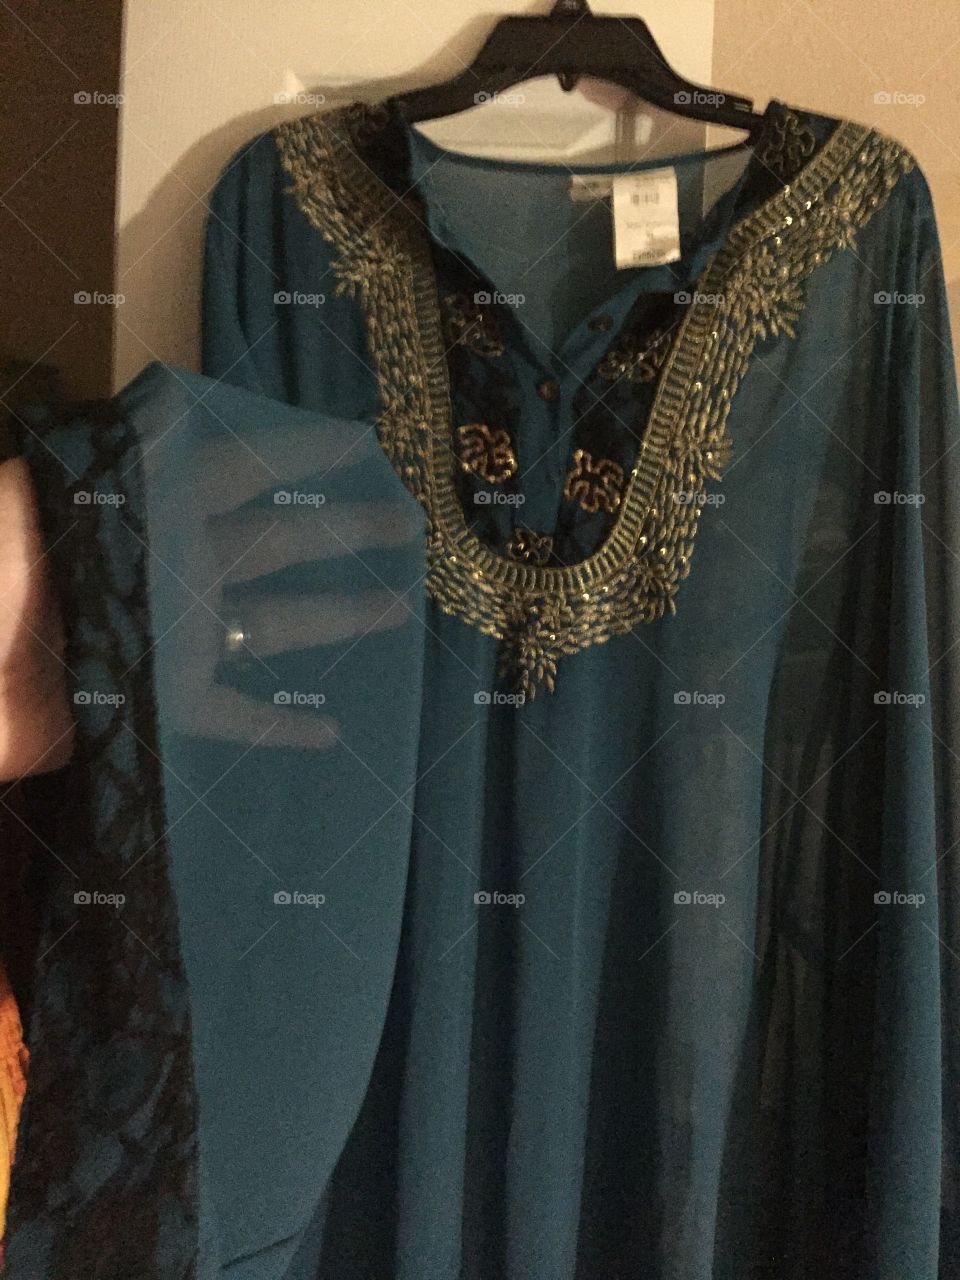 Middle Eastern clothing. This is called "Abaya."
It is a floor length dress that was purchased from East Essence. There is another black dress worn under this. 